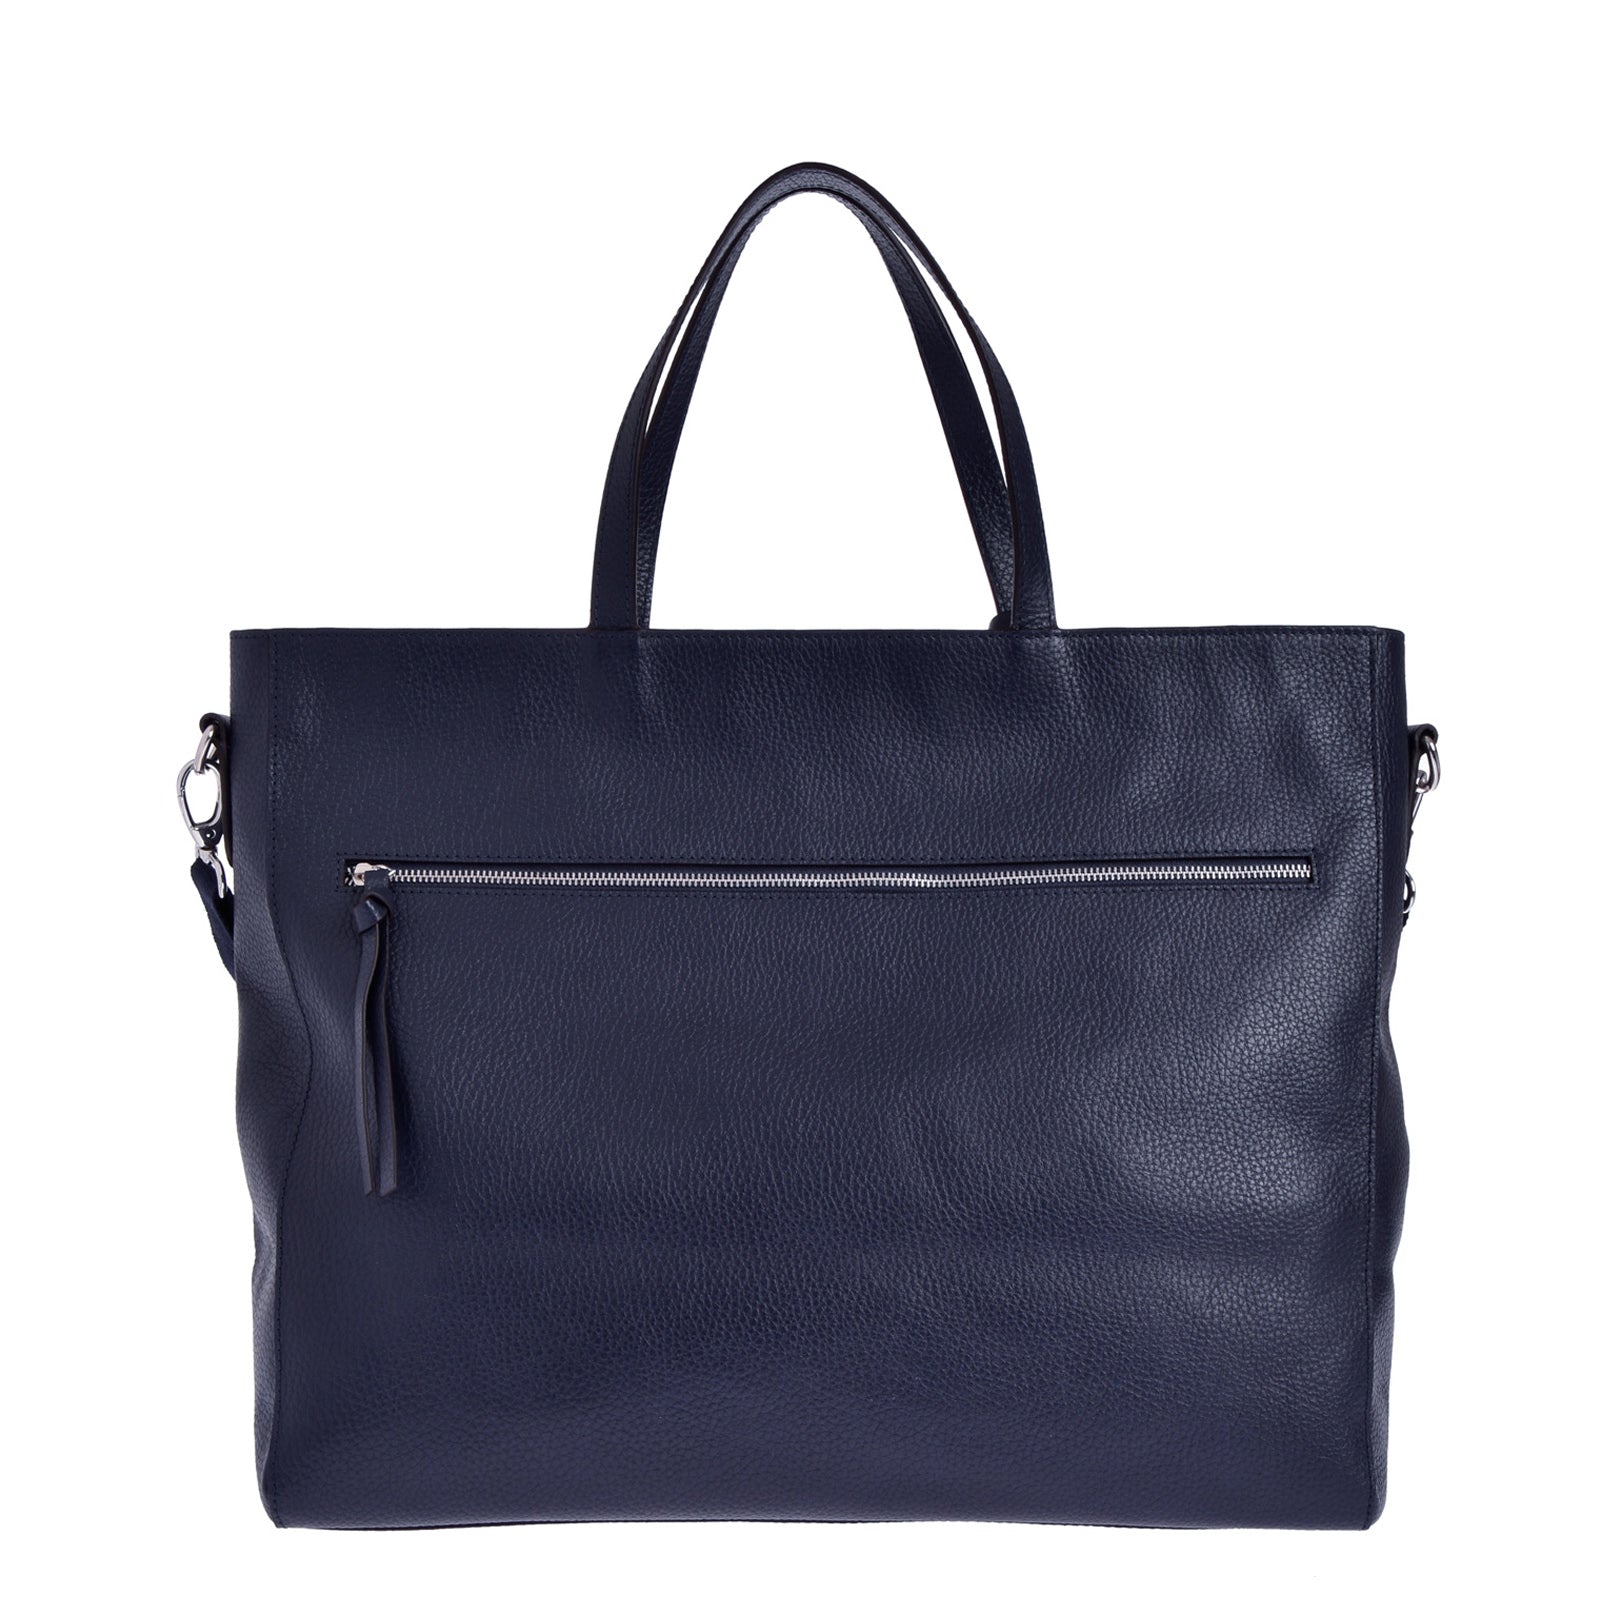 ROME - Grained leather weekend bag